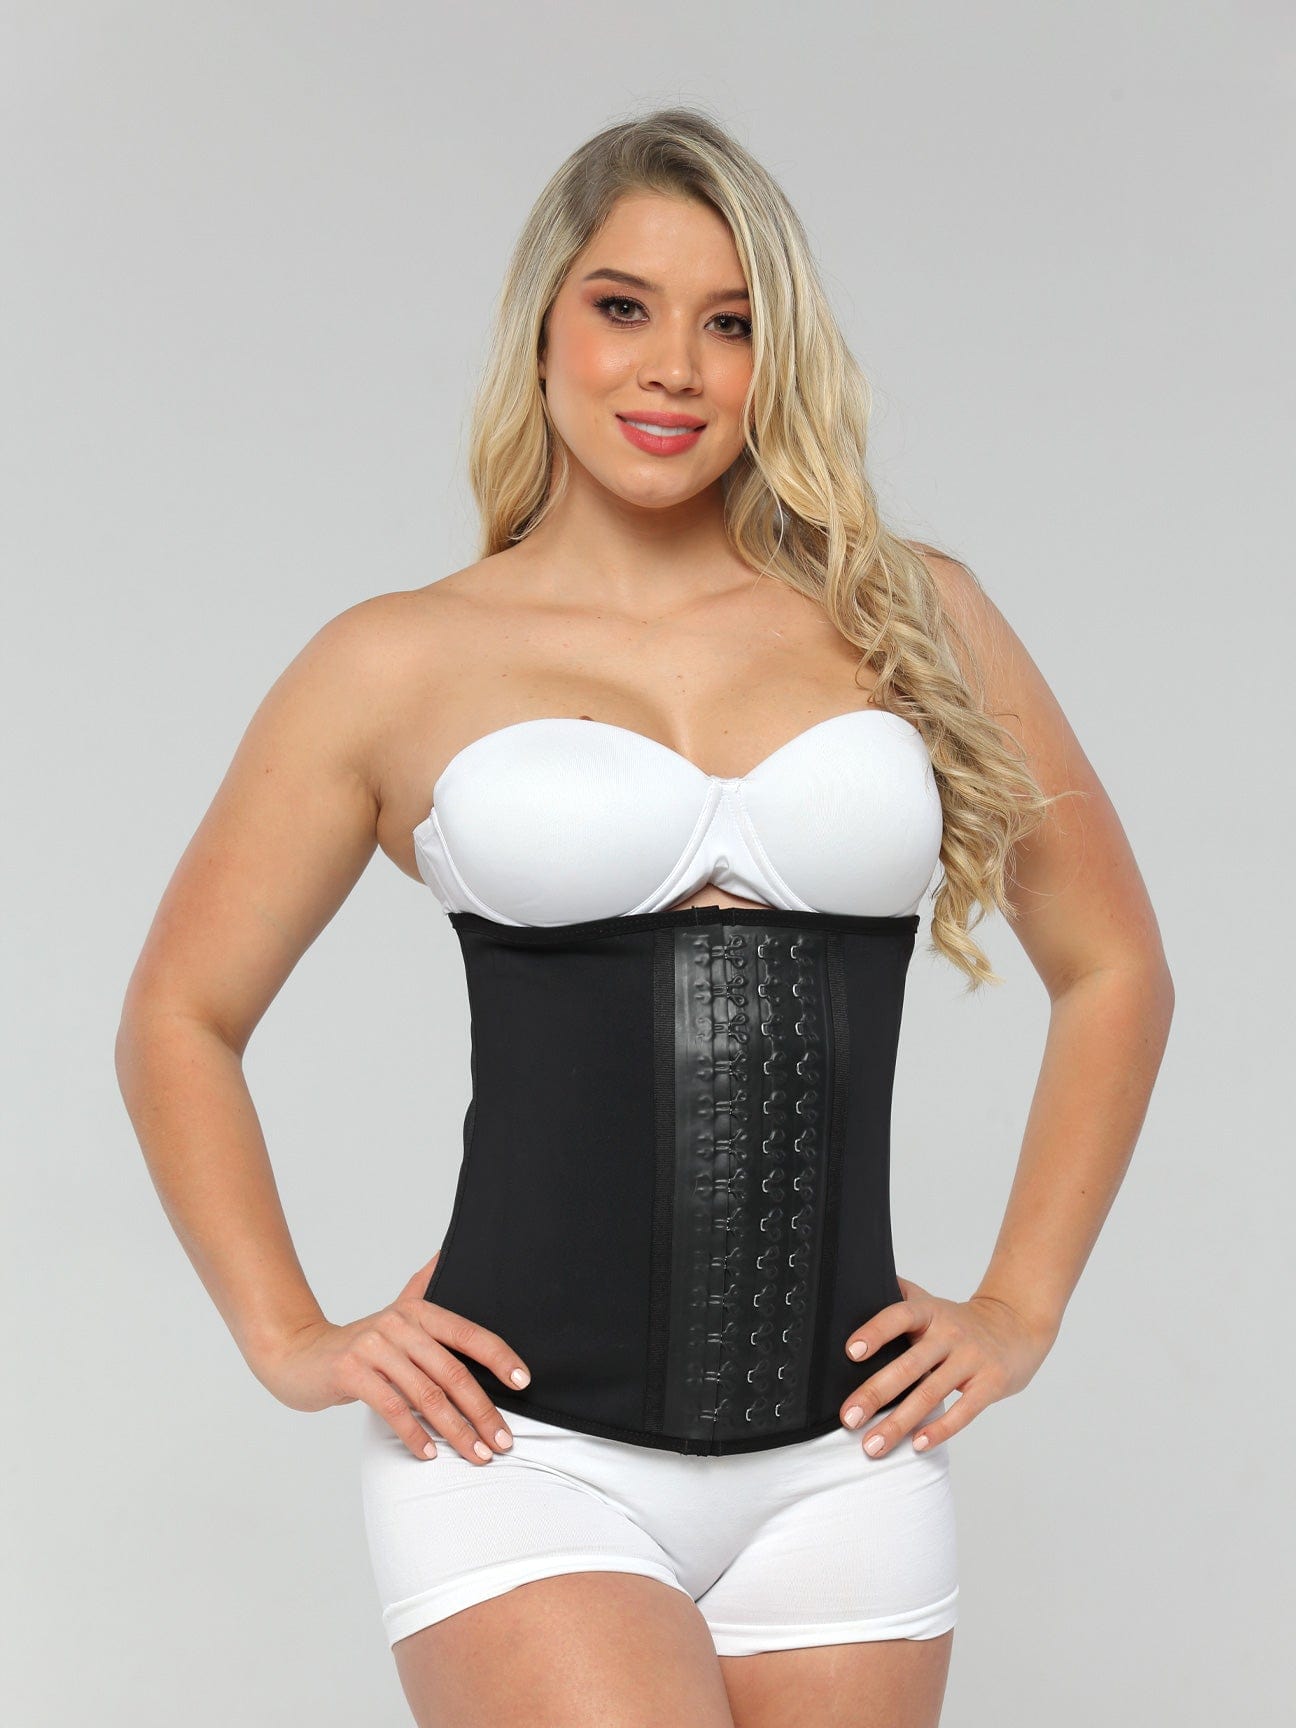 Waist Trainers for sale in Cortes Bay, British Columbia